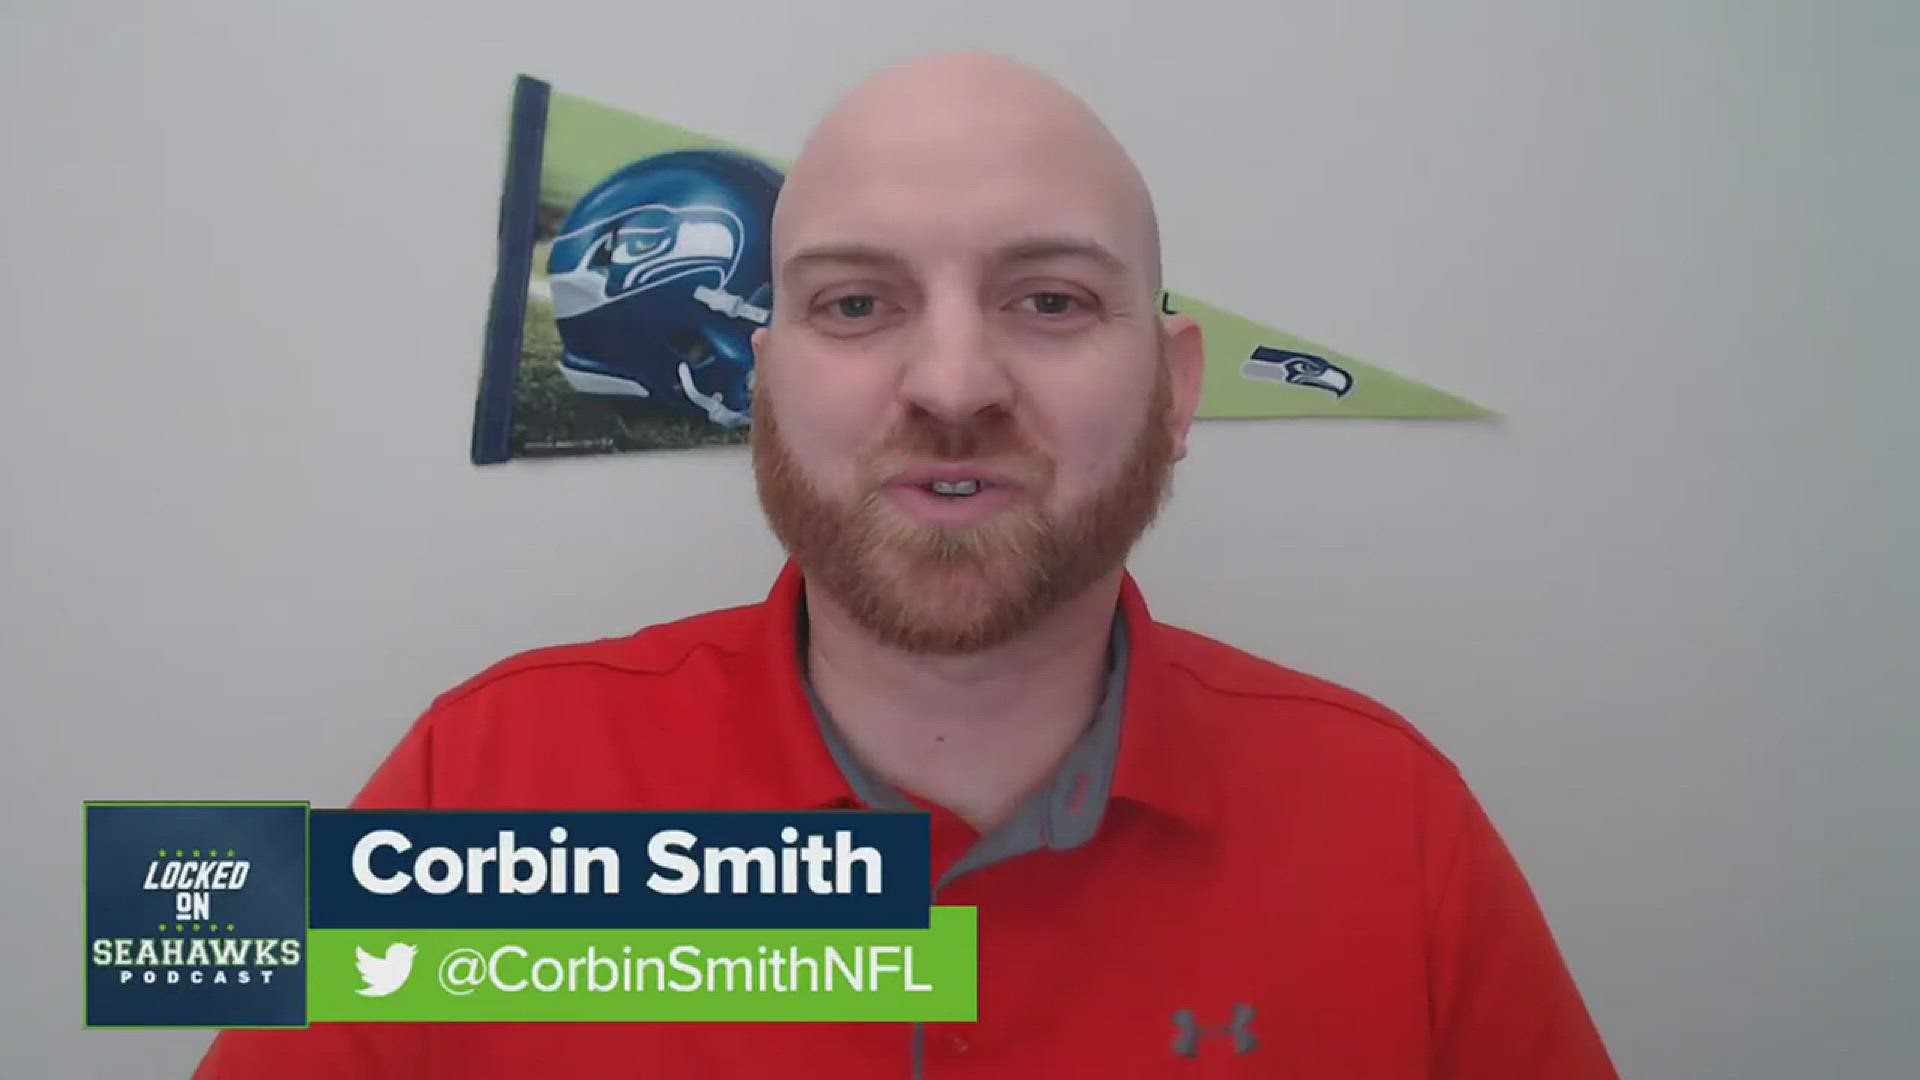 Host Corbin Smith dishes out grades for Smith and the rest of Seattle's offensive groups after 10 games with in-depth analysis.